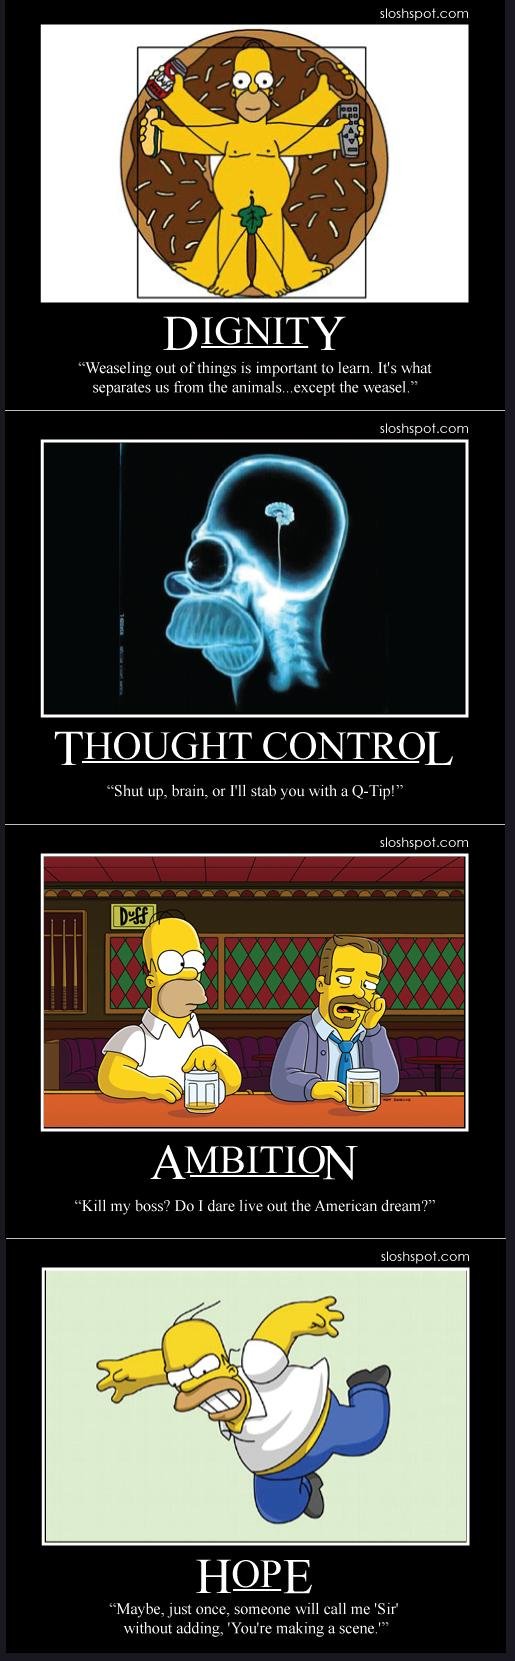 homer quotes. &lt;a href=&quot;pictures/997473/dark+side/&quot; target=blank&gt;www.funnyjunk.com/funnypictures/997473/dark+side/&lt;/a&gt;&lt;br /&gt; &lt;a hr